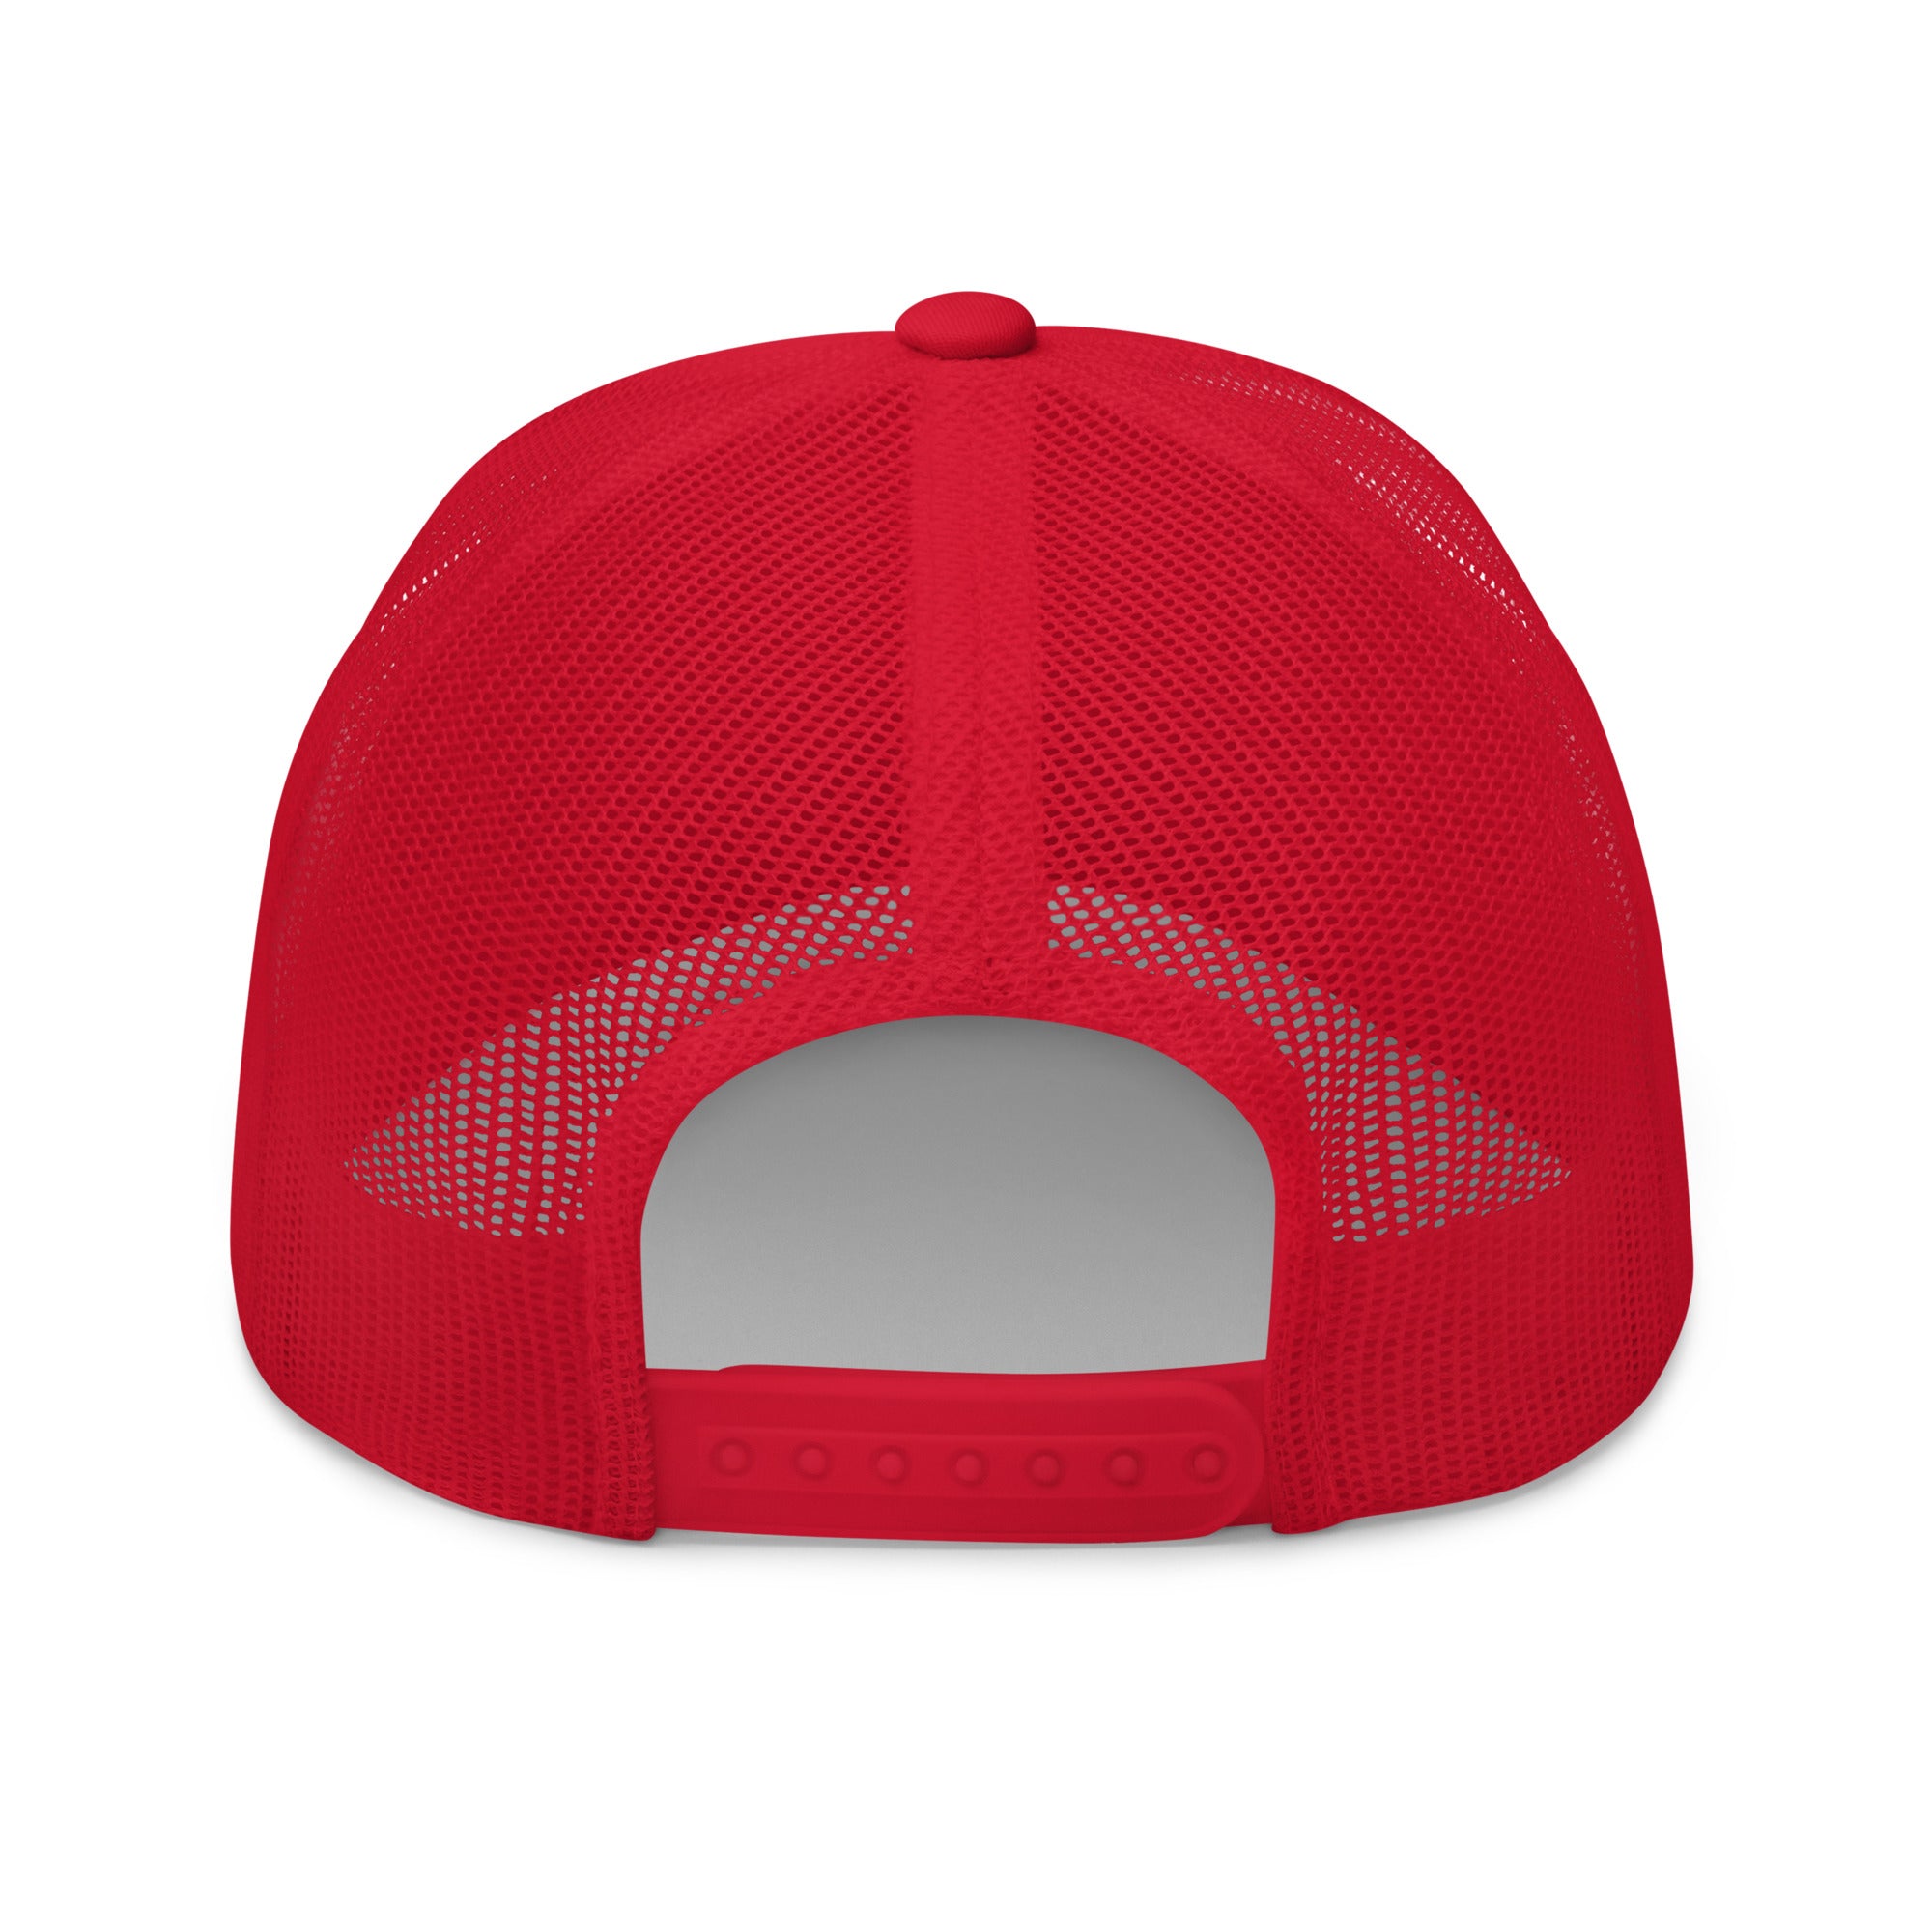 Bitcoin Merchandise - The Stack Sats Trucker Hat has mesh back panels and a snapback closure. Back view.